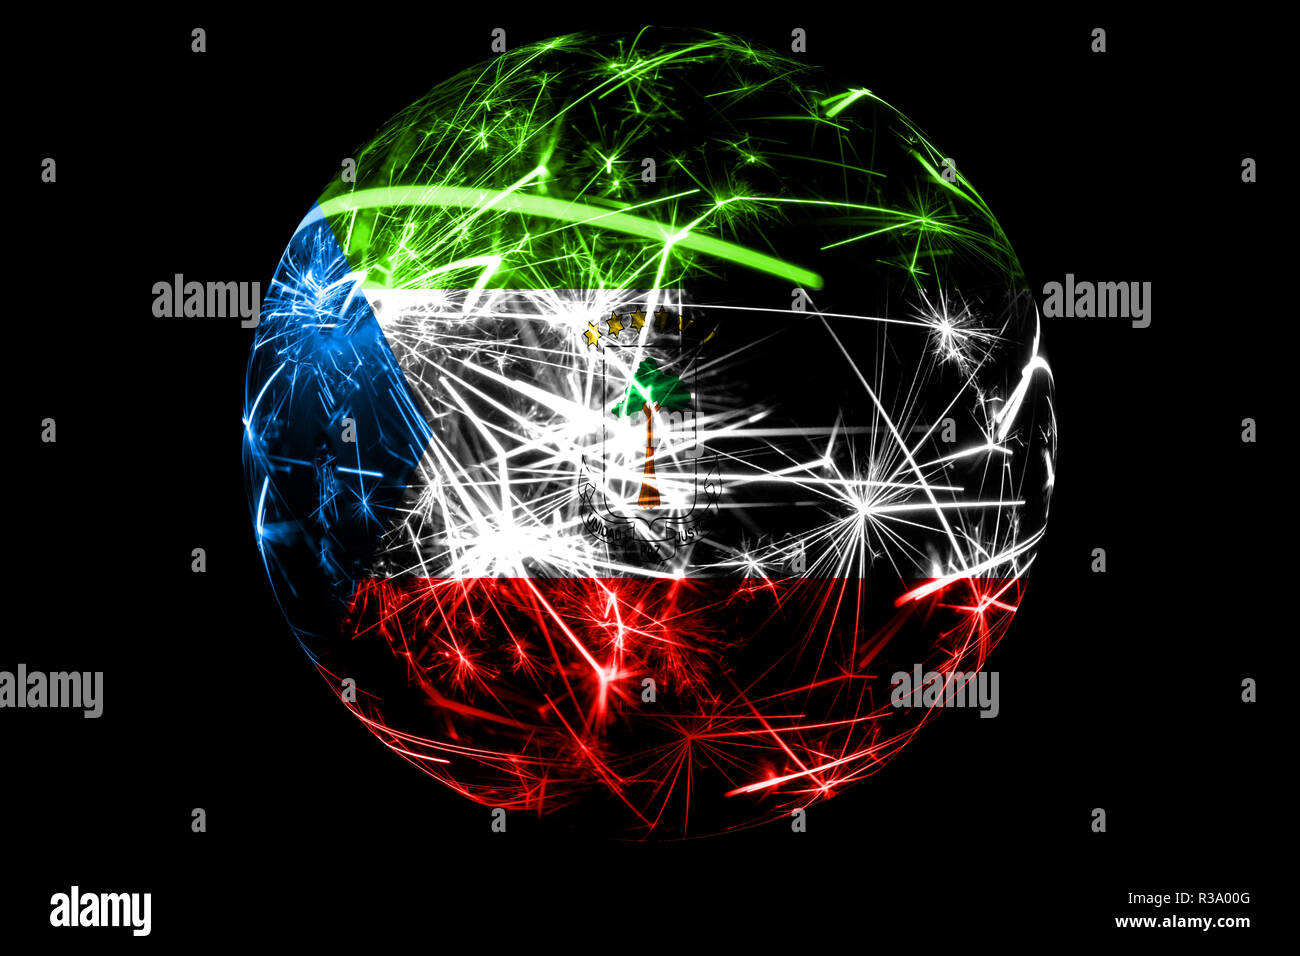 Abstract Equatorial Guinea sparkling flag, Christmas ball holiday concept isolated on black background Stock Photo